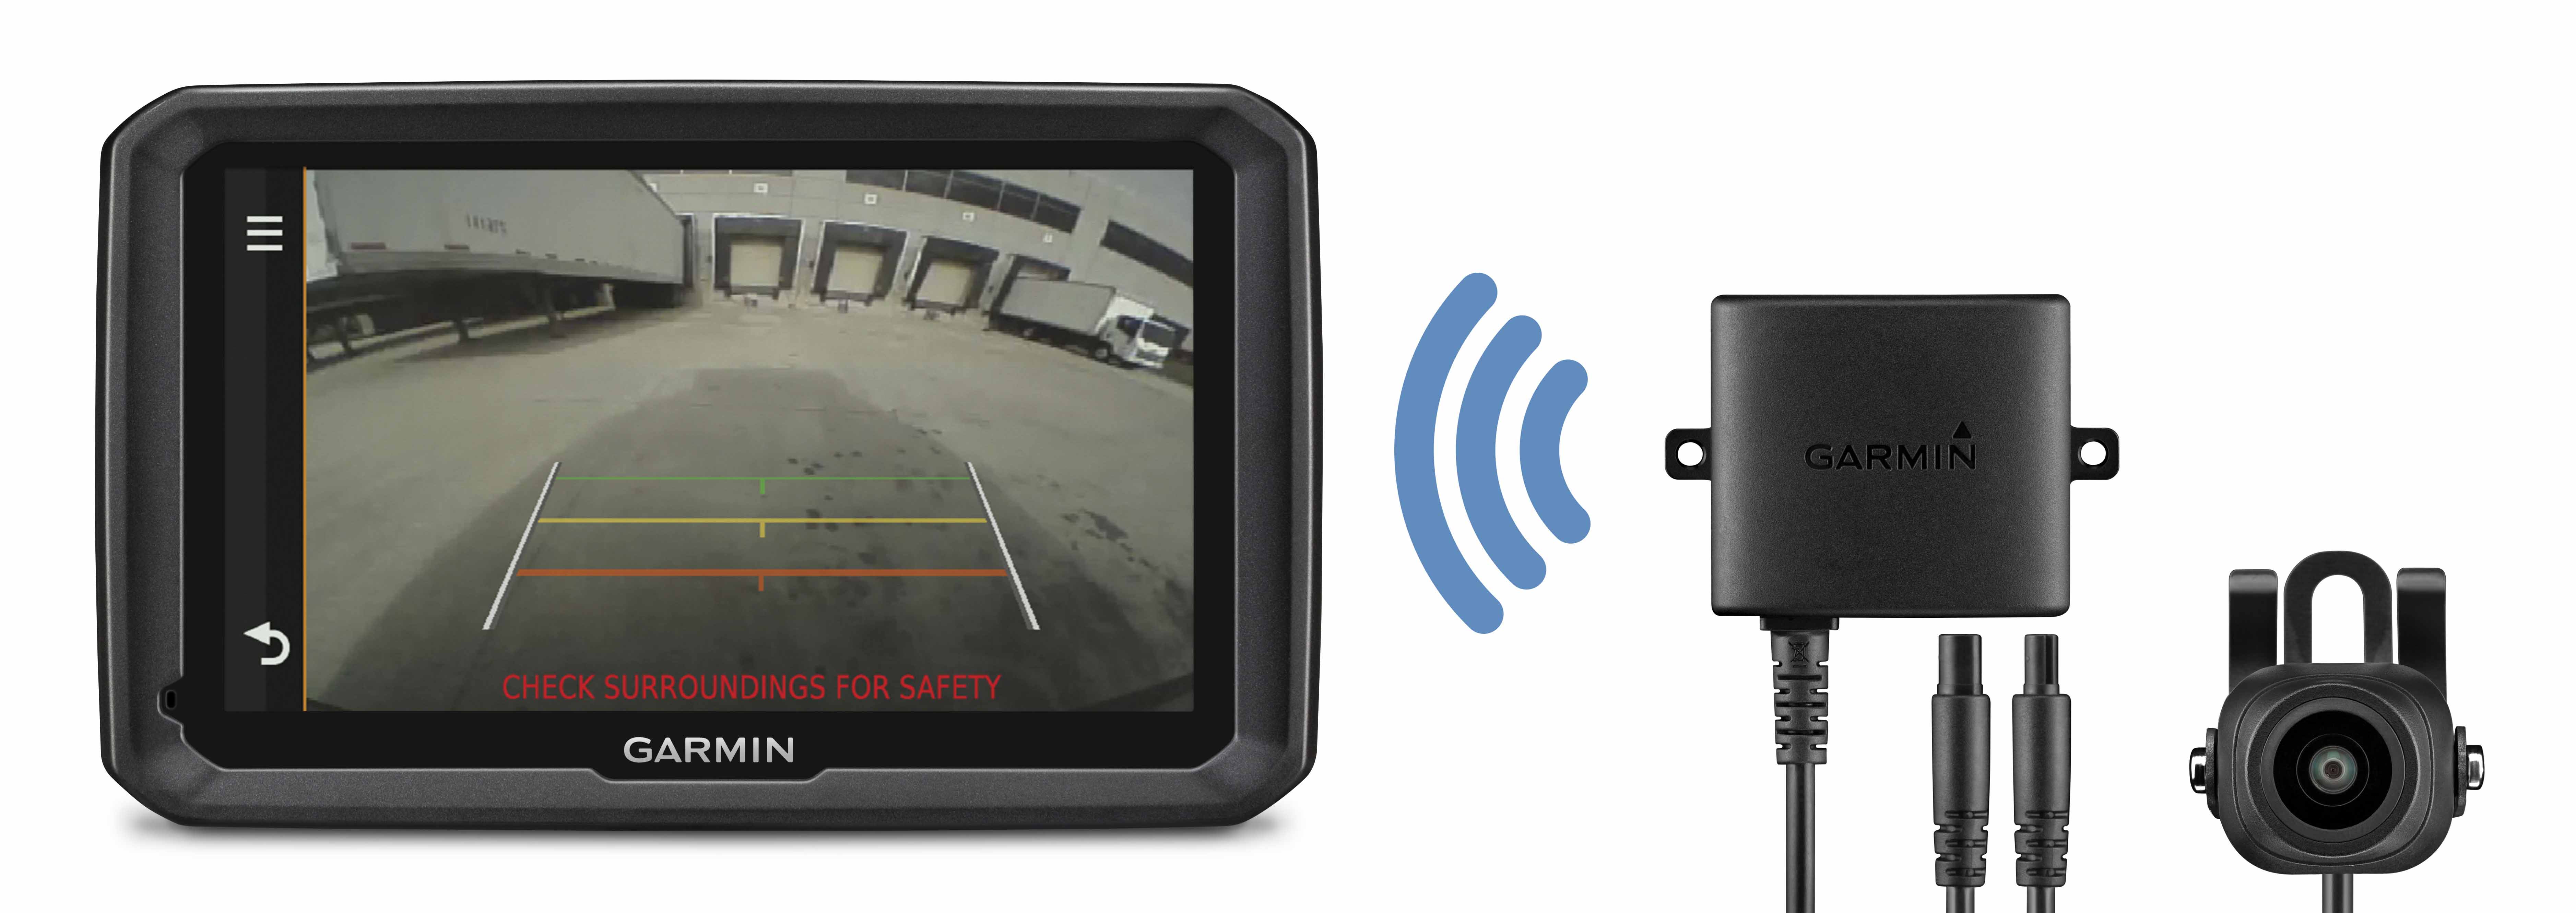 dezl-770lmt-and-BC-30-trailer-backup-cam